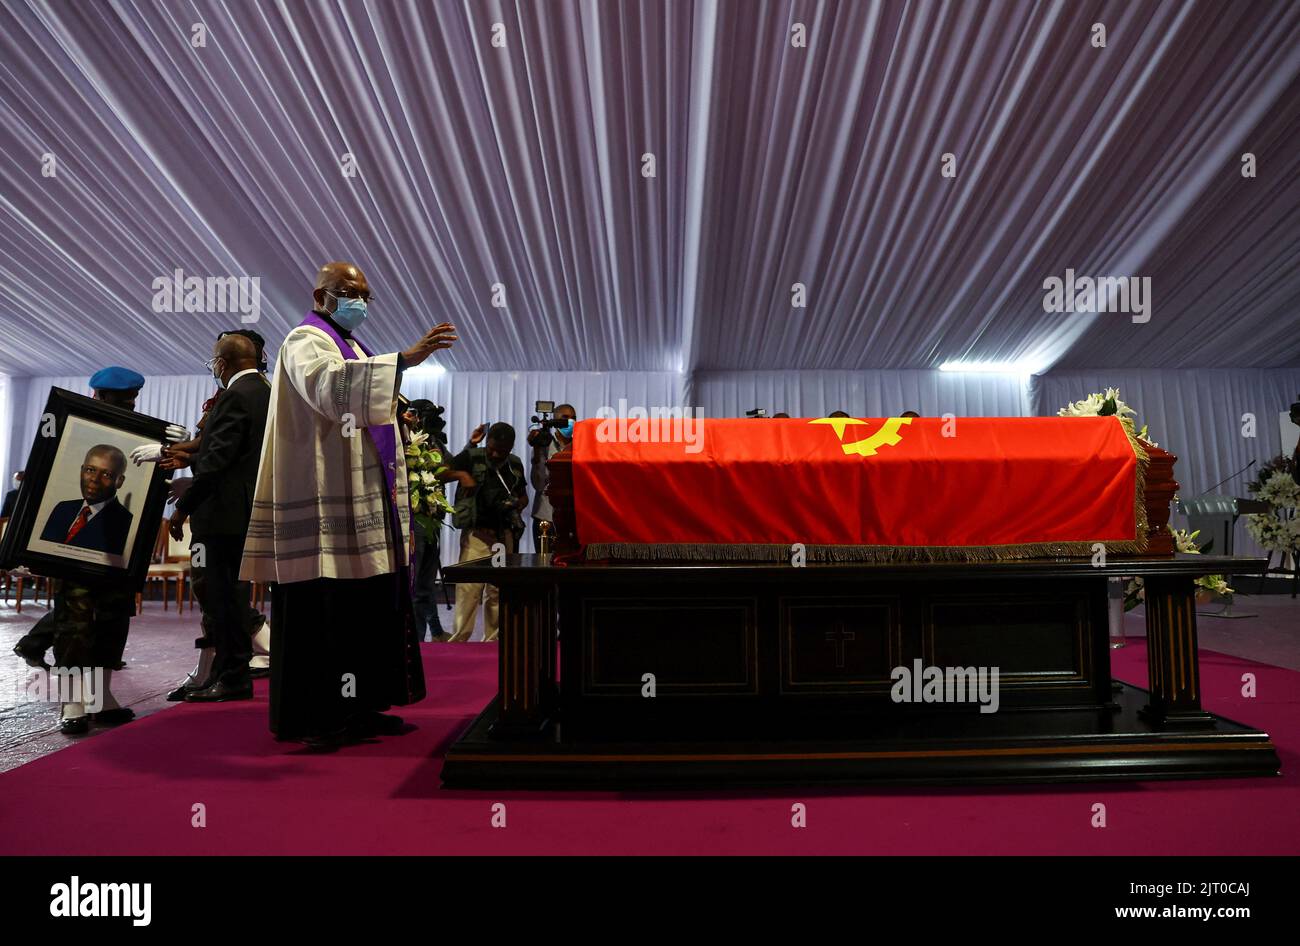 A priest blesses a casket carrying the body of Angola's former President Jose Eduardo dos Santos, who died in Spain in July, as it lies at the Agostinho Neto Memorial in Luanda, August 27, 2022. REUTERS/Siphiwe Sibeko Stock Photo